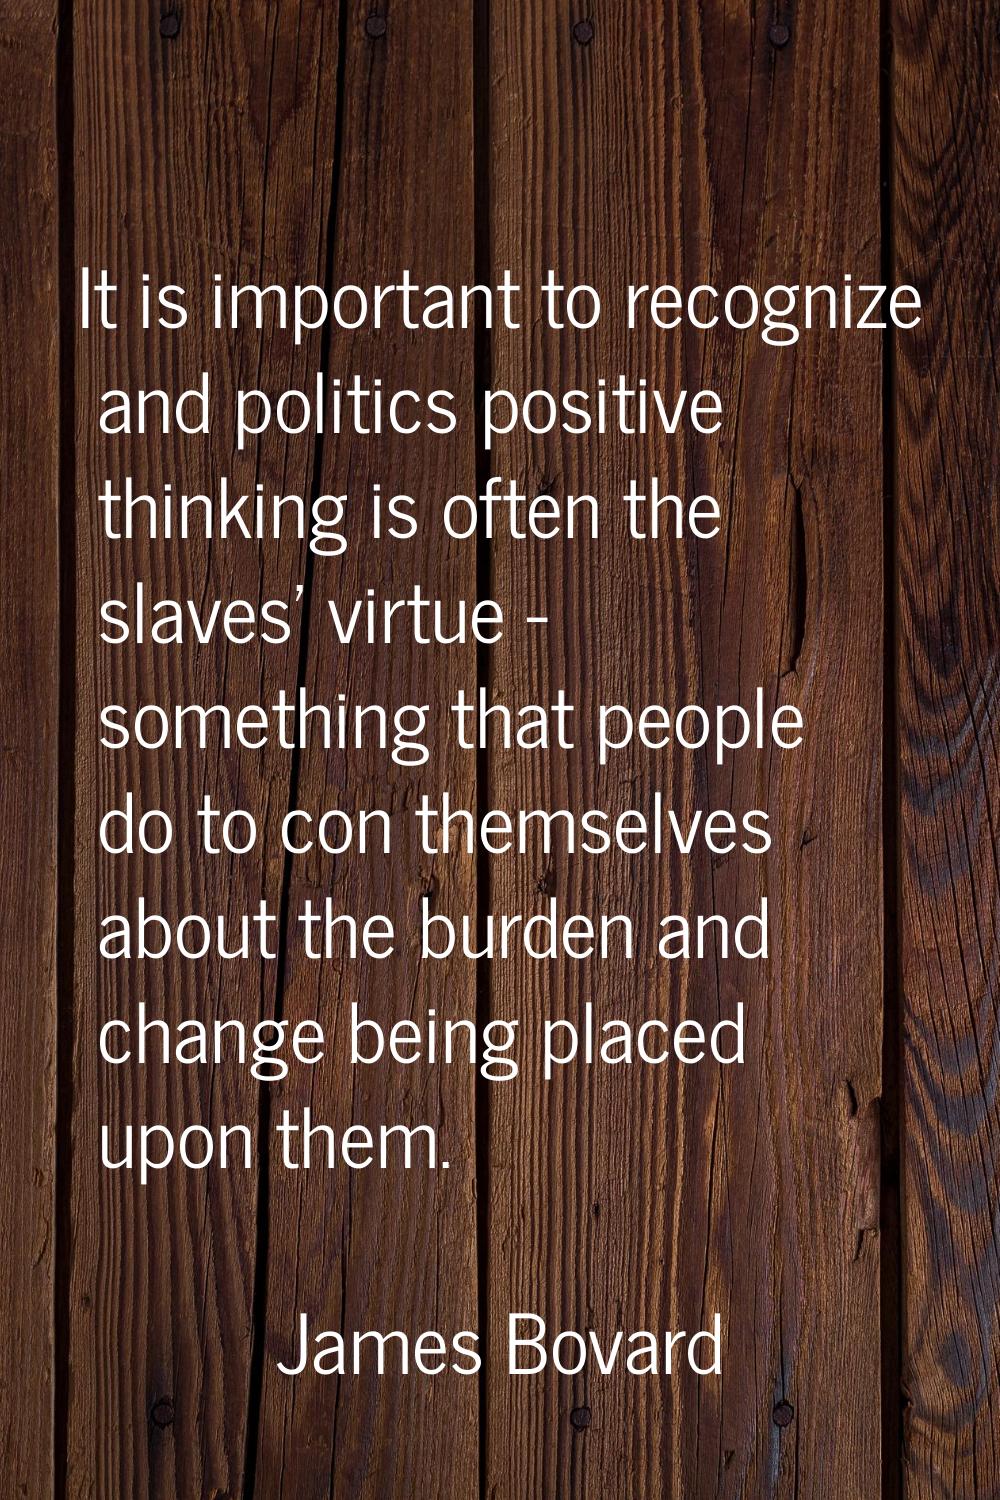 It is important to recognize and politics positive thinking is often the slaves' virtue - something